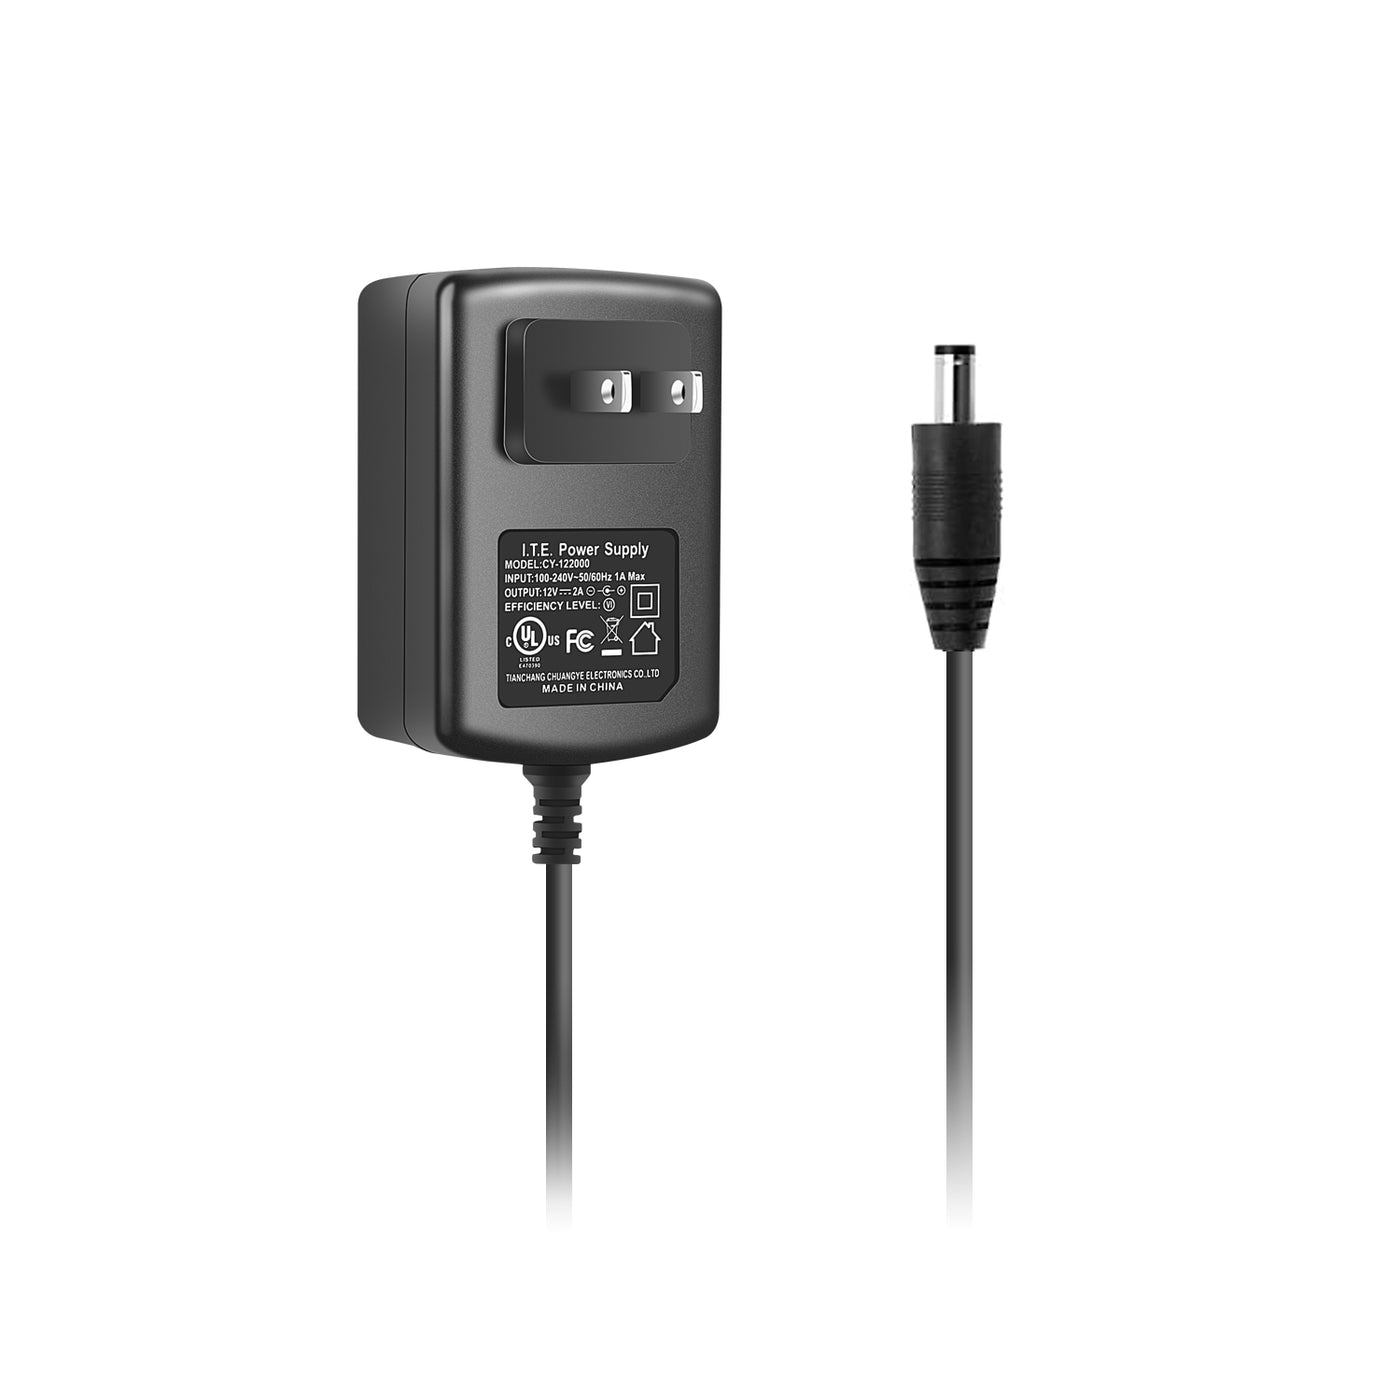 Power Adapter AC to DC 12V 2A